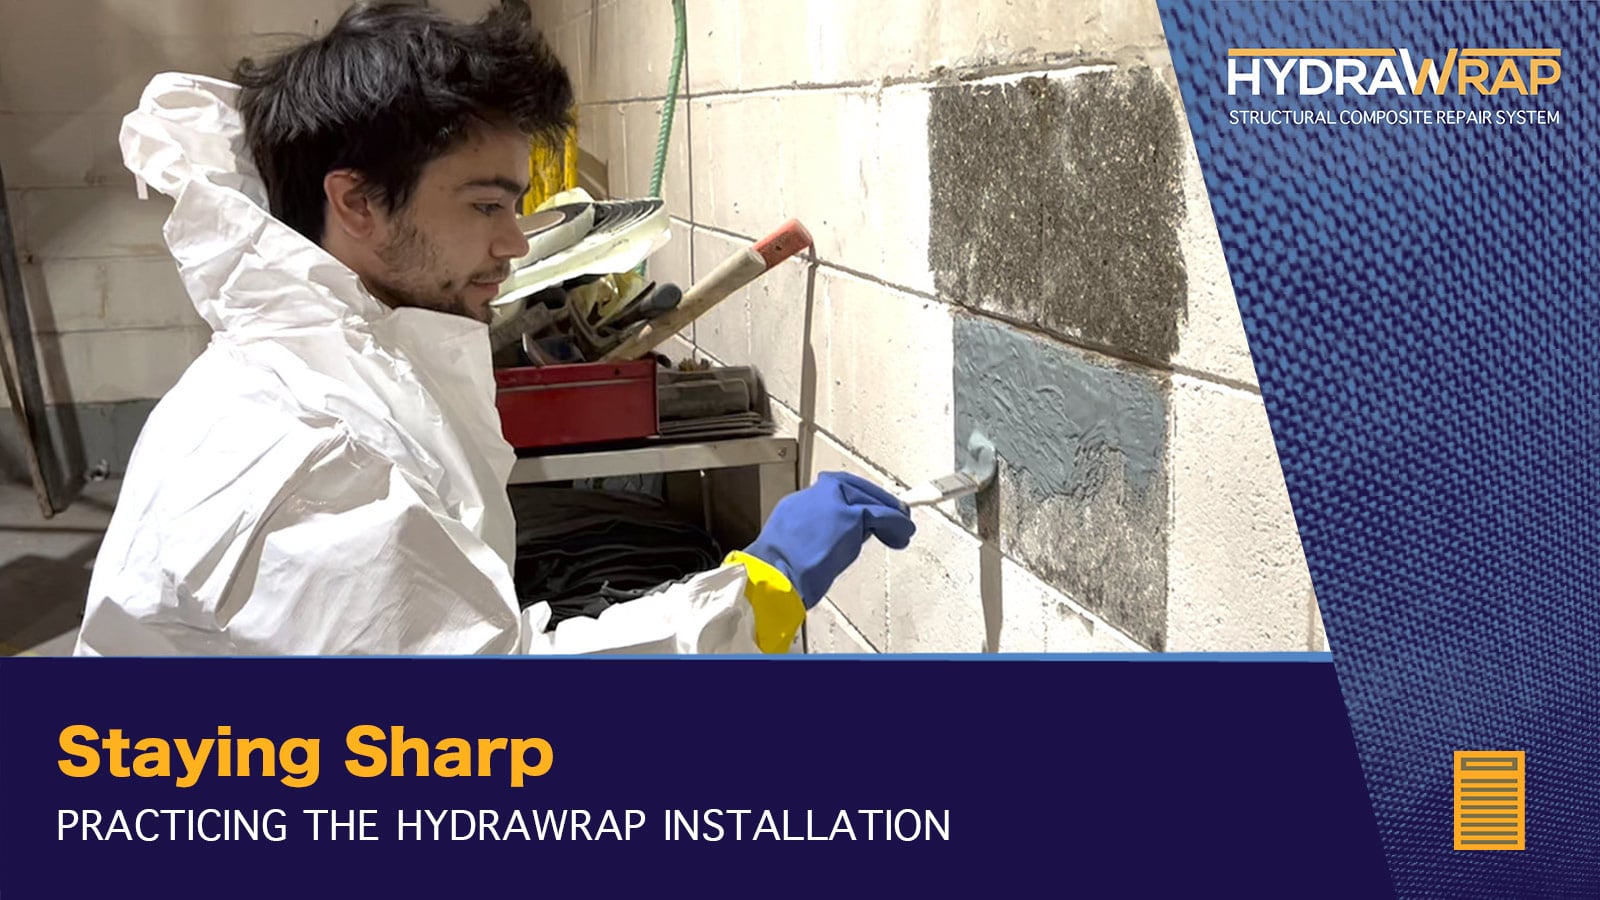 Field Technician applying primer to a wall in preparation for HydraWrap installation, 'Staying Sharp, Practicing The Entire HydraWrap Installation'